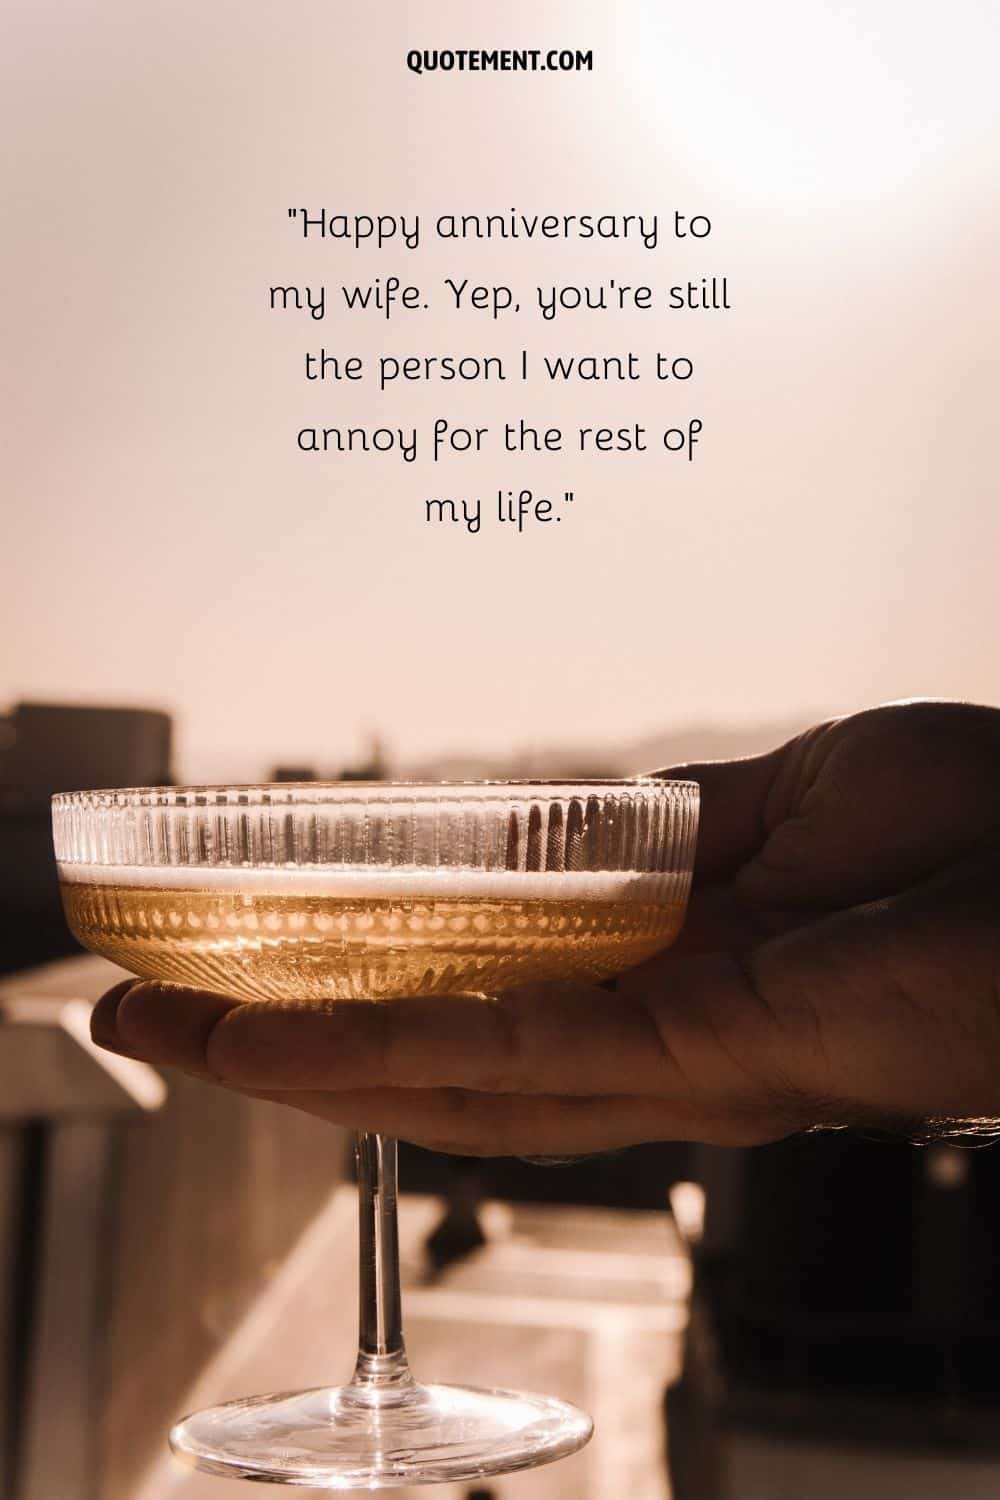 a hand holding a glass of drink representing funny anniversary quote